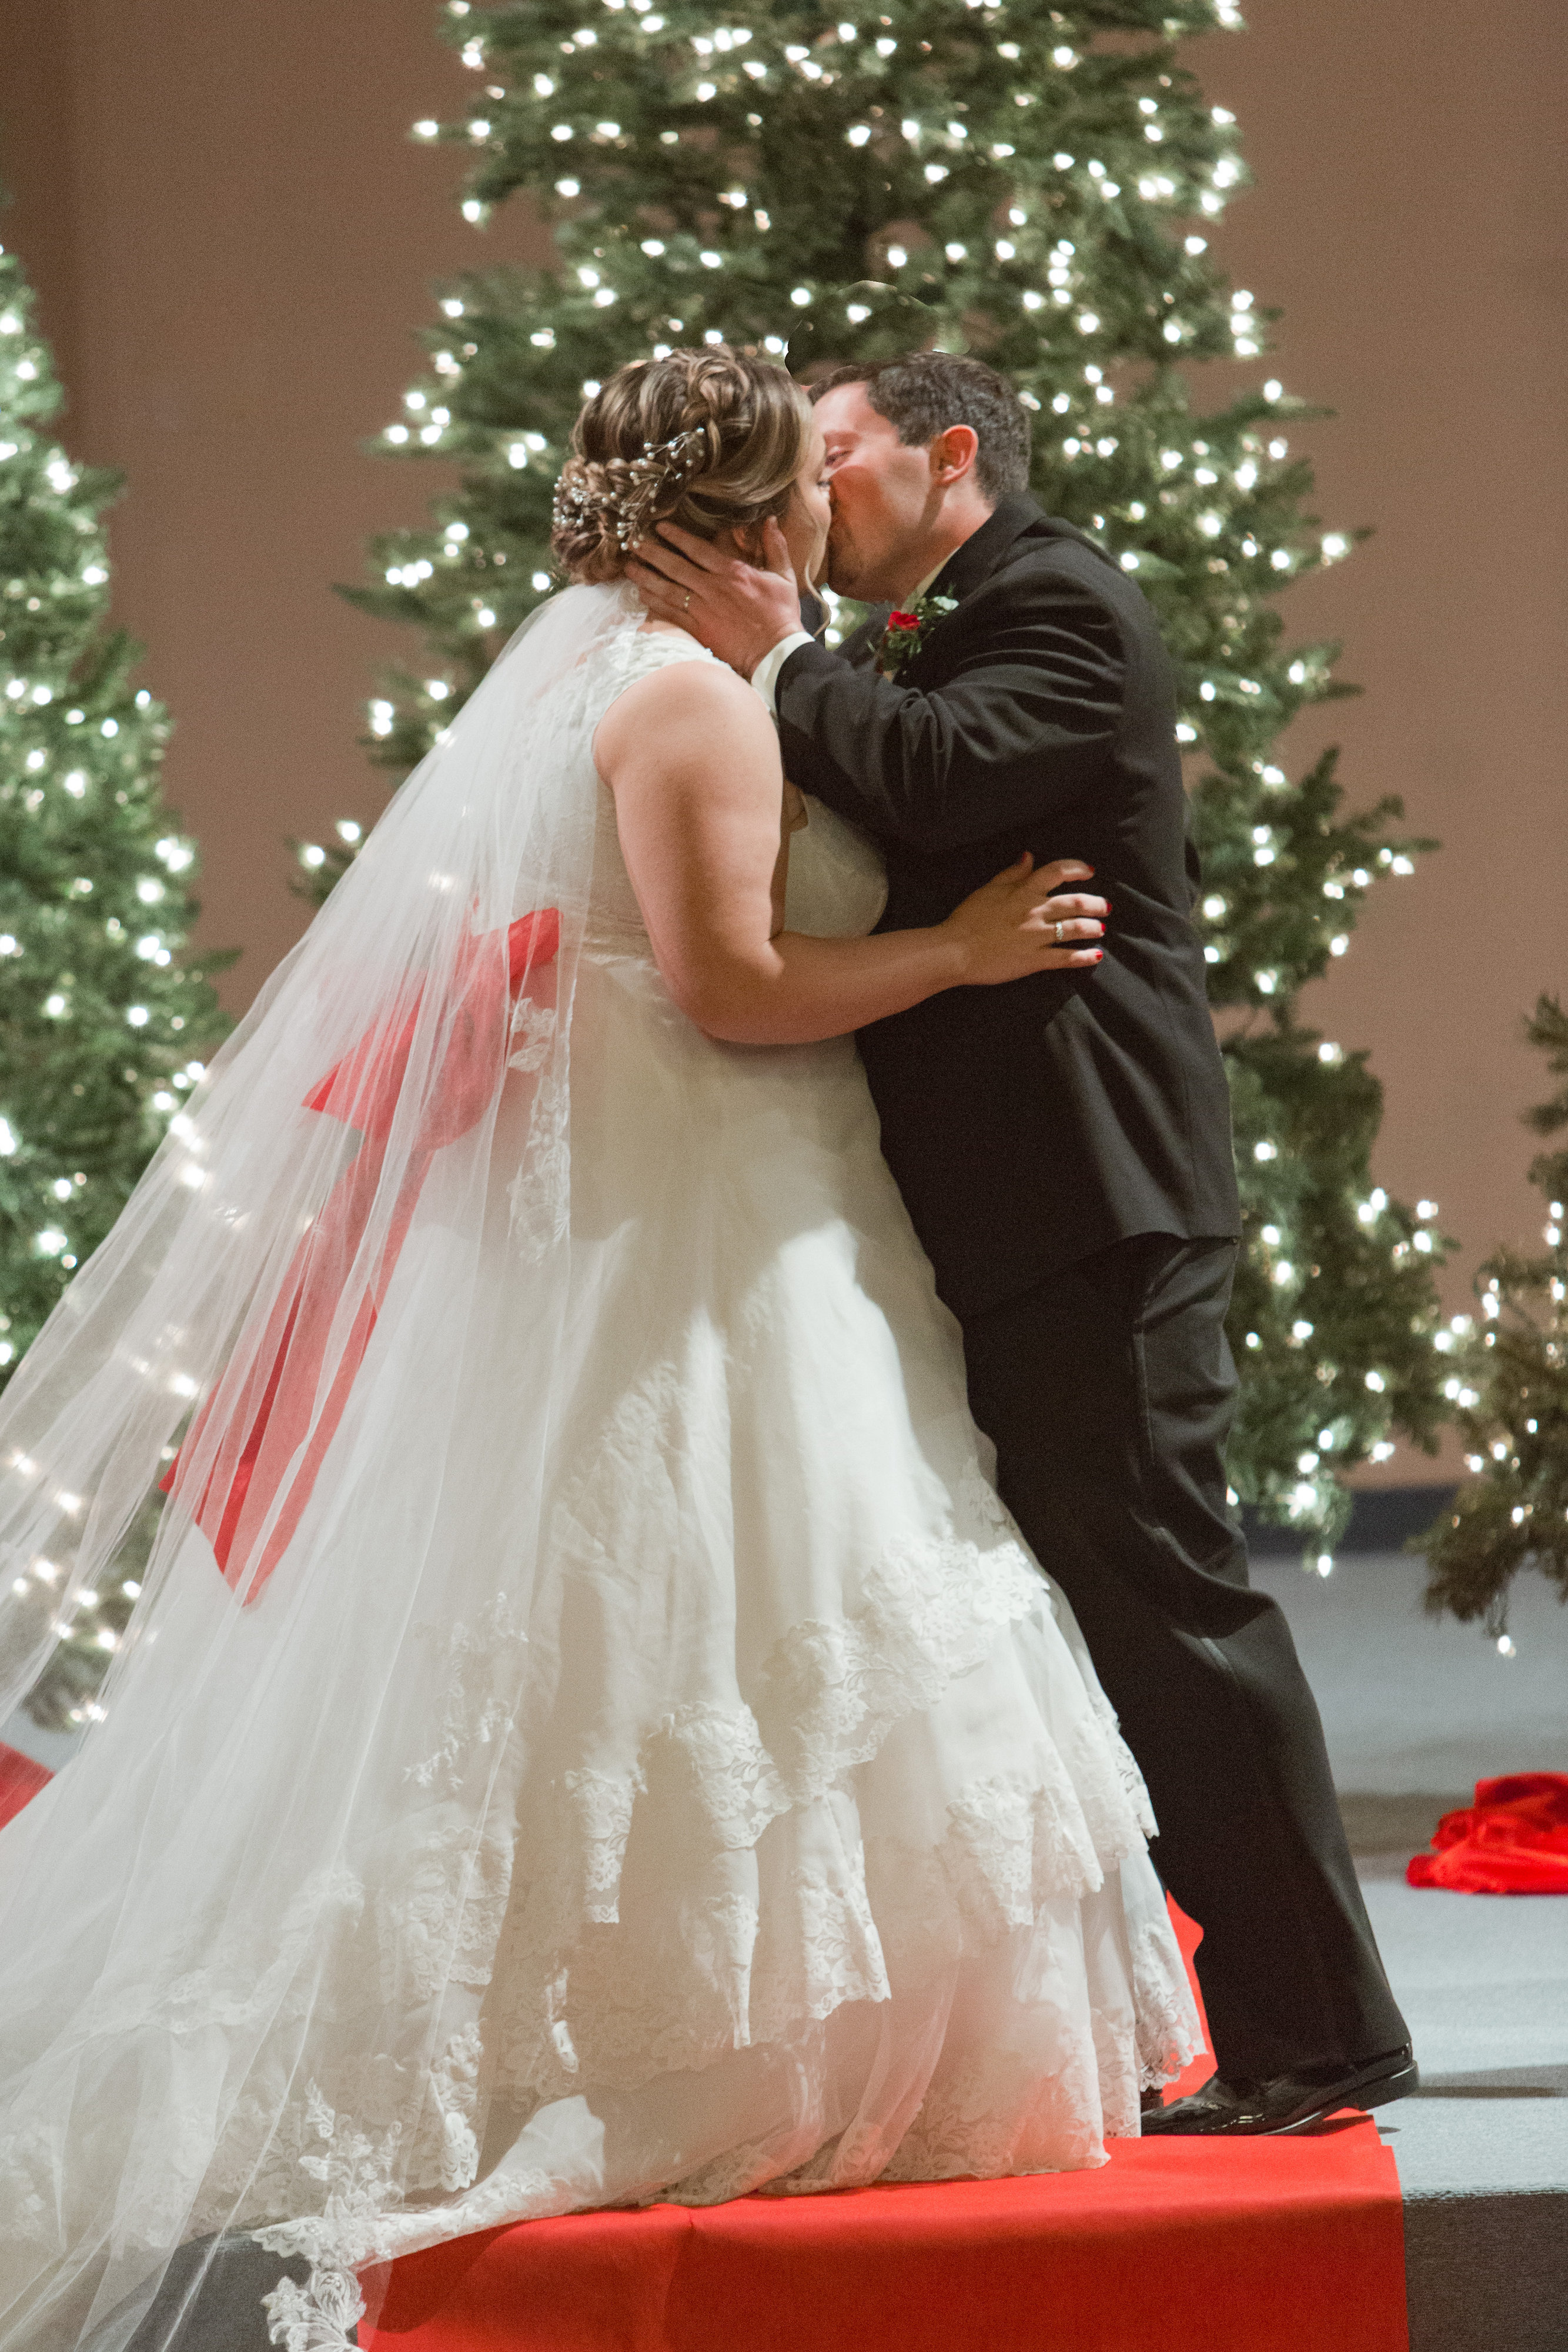 Red Roses, Wedding Bouquet, Tuxedo, First Kiss, Christmas Trees, Christmas Lights, Red sash, Groom, bride and groom, Engagement Ring, Red glitter, Keds, Kate Spade, Red Glitter Keds by Kate Spade, Red nail polish, Wedding, Wedding Ring, Red, Married, Wedding Dress, Ft. Meyers, Florida